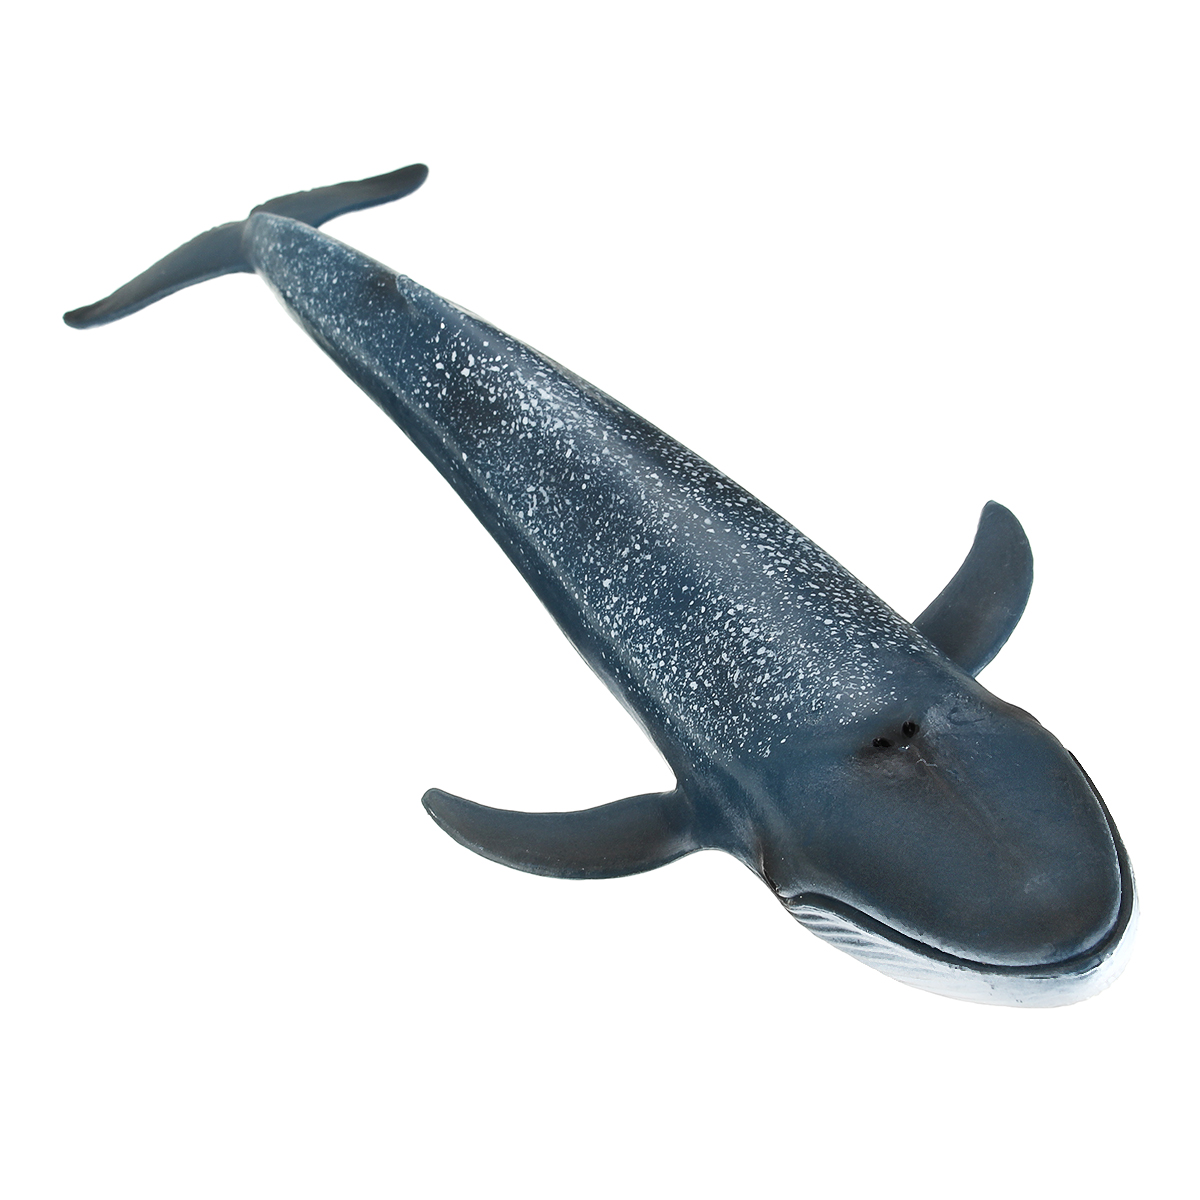 Realistic-Ocean-Animal-Model-Marine-Animal-Solid-Whale-Shark-Series-Science-Education-Puzzle-Toys-1460134-5